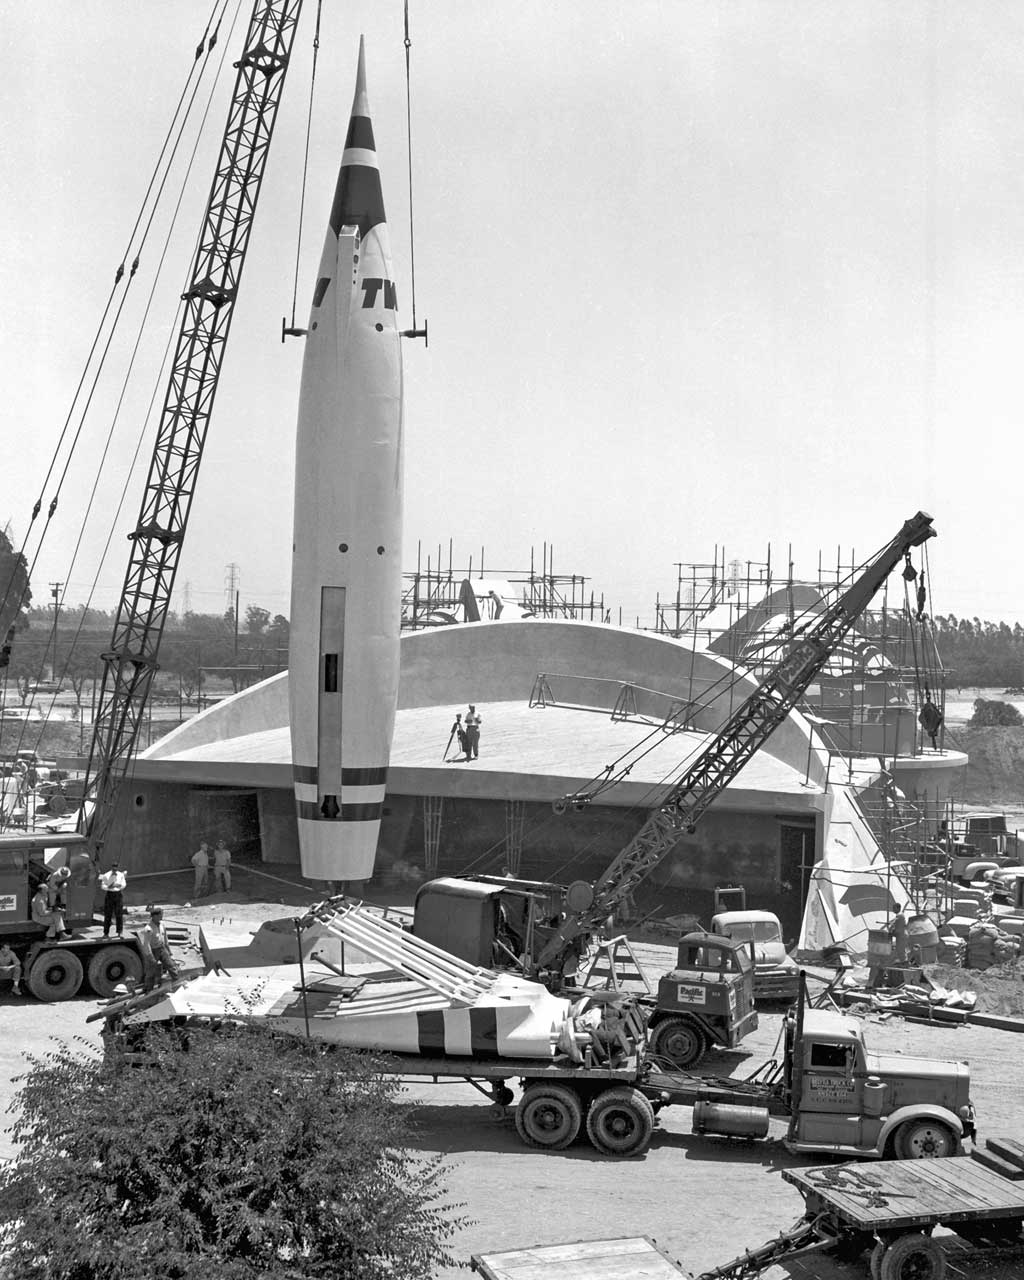 TOMORROWLAND UNDER CONSTRUCTION (1955) -Ð Only days before opening day, a crane lifts the ÒRocket to the MoonÓ during construction of Tomorrowland.